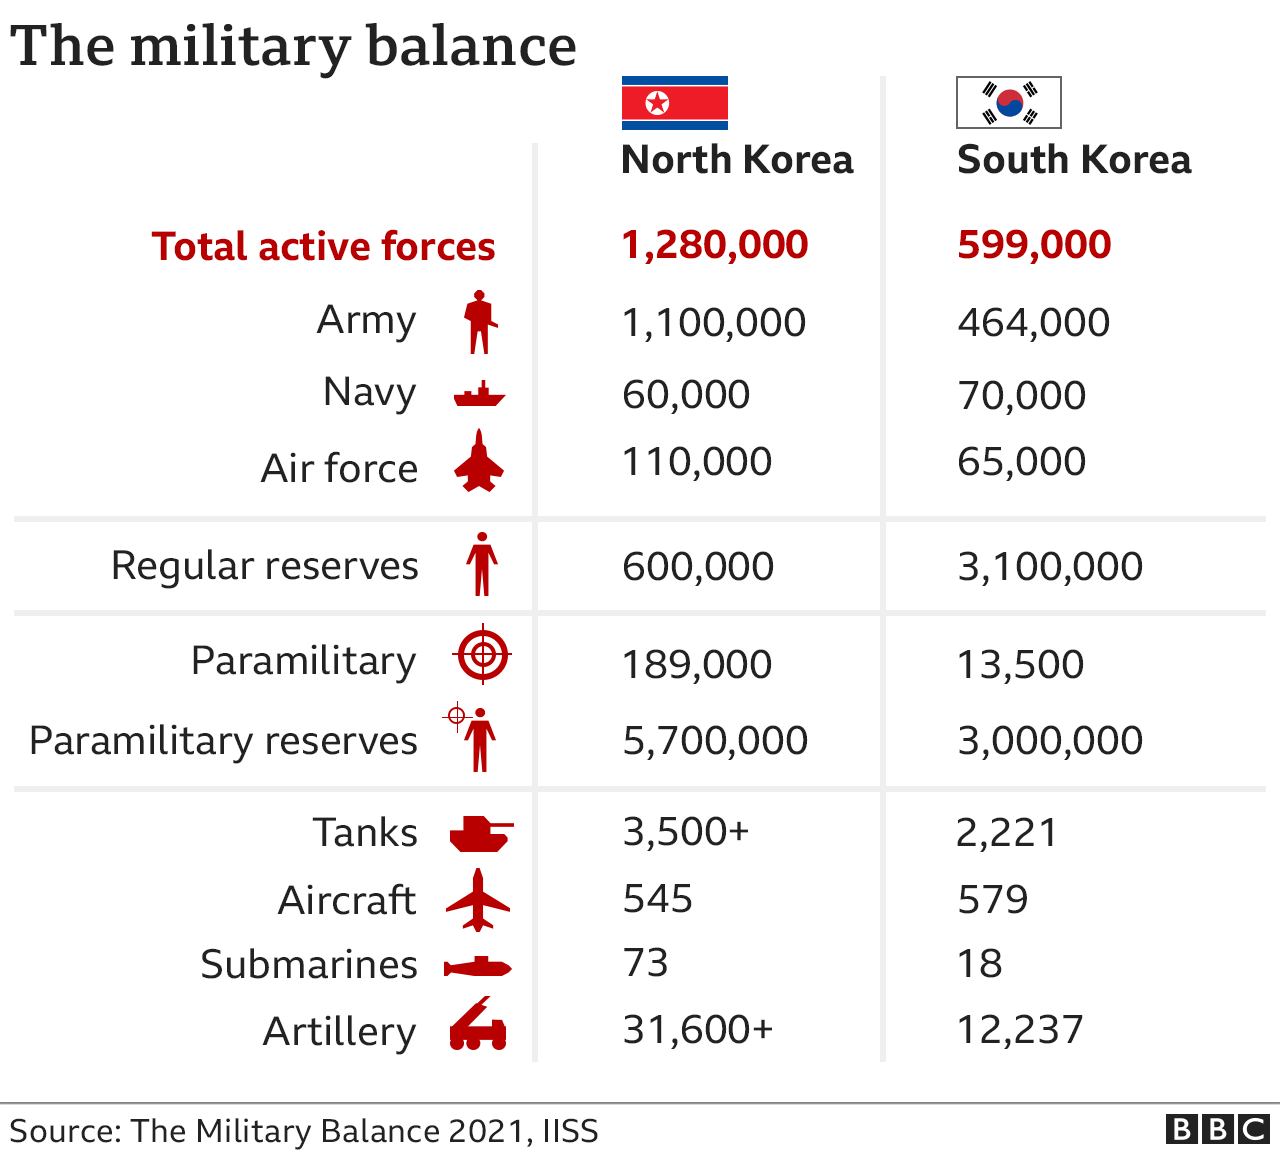 Data pic showing military balance between North and South Korea